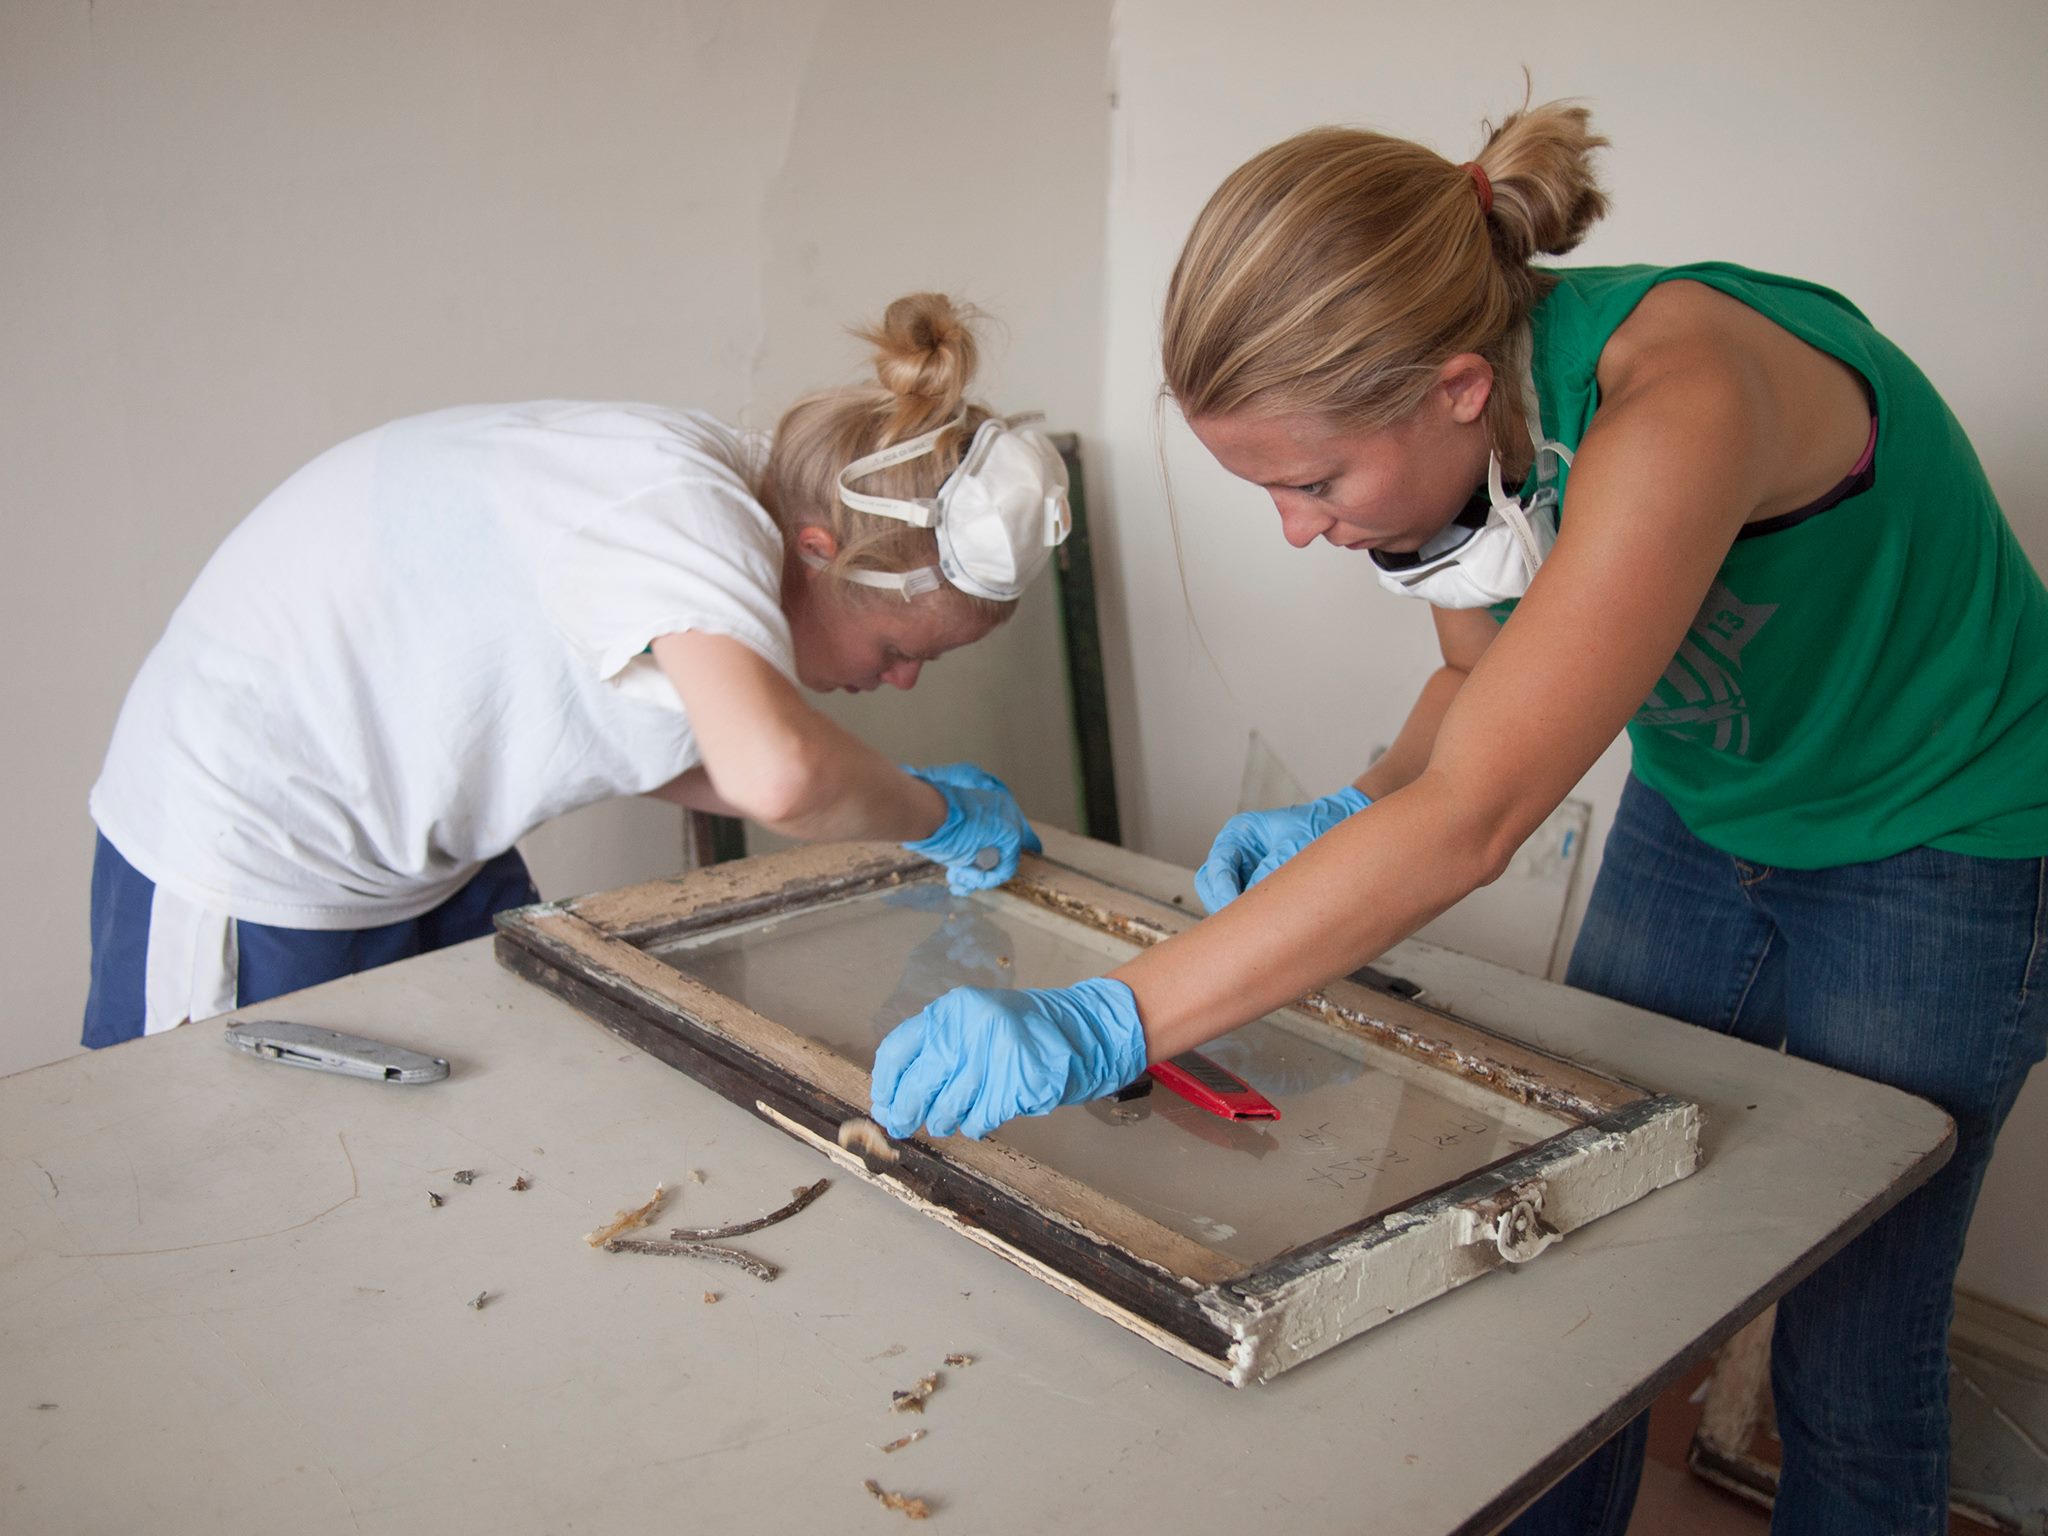 Claire Leftwitch (left) and Lindsey Allen restore windows on Viola Street in August 2014 | courtesy of Young Friends of the Preservation Alliance